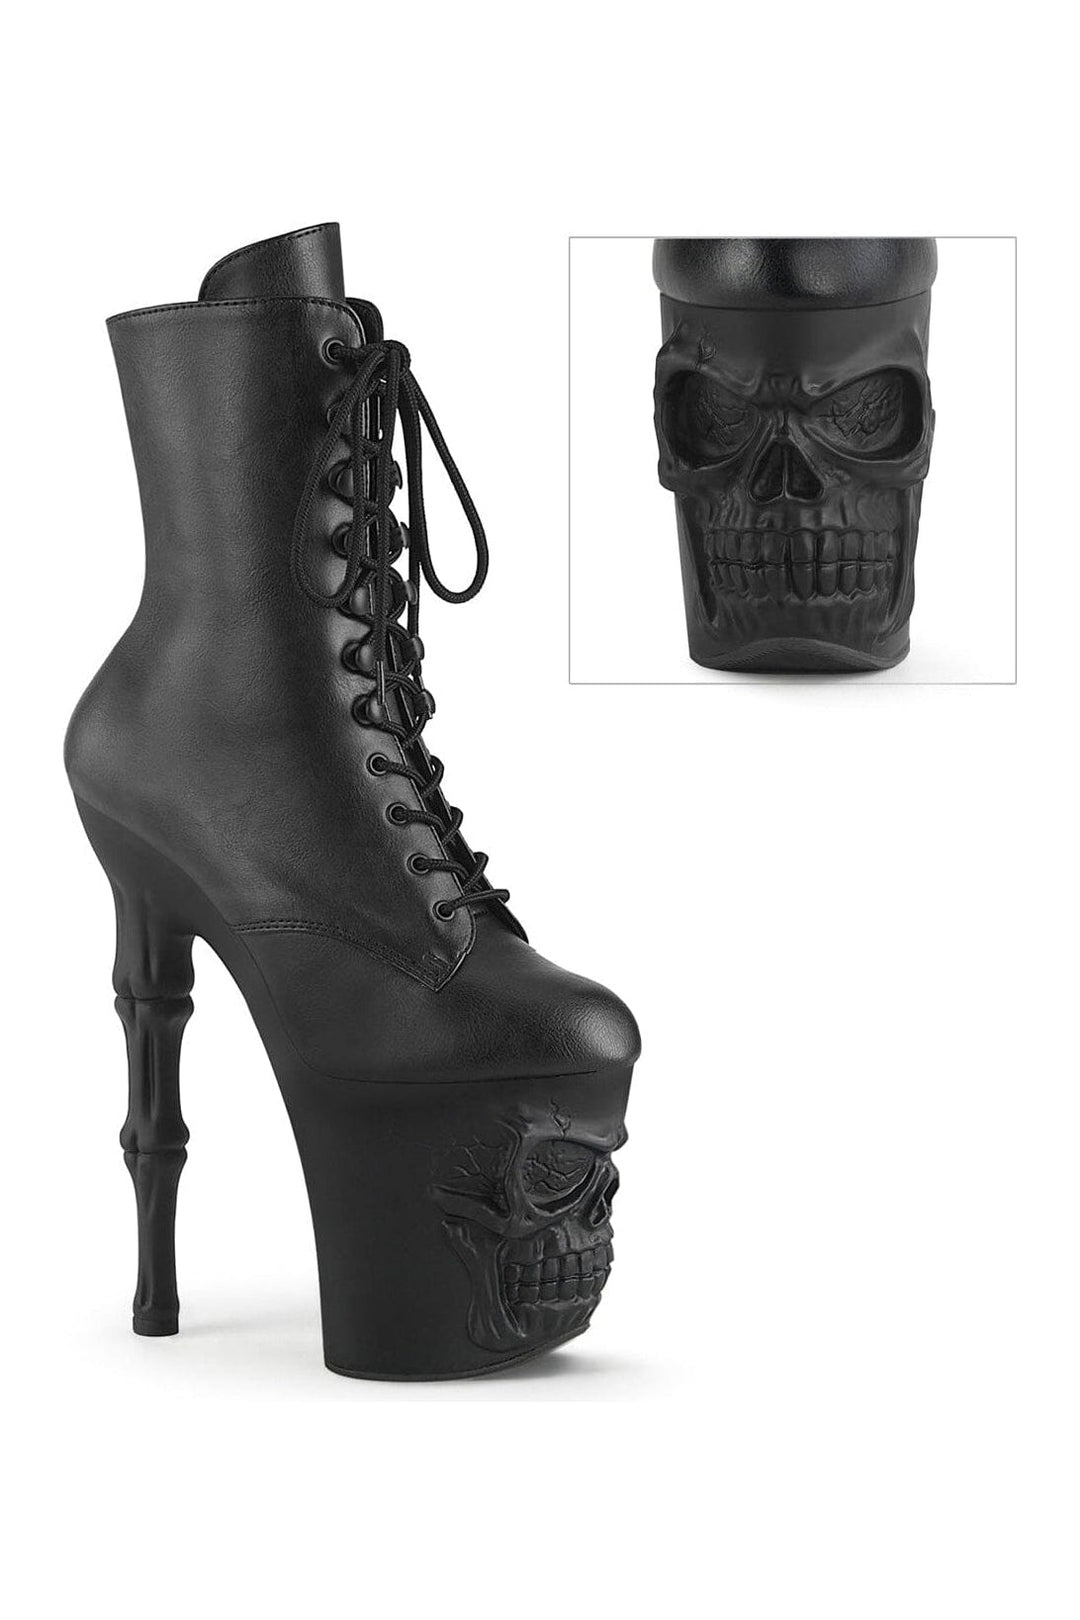 RAPTURE-1020 Black Faux Leather Ankle Boot-Ankle Boots-Pleaser-Black-10-Faux Leather-SEXYSHOES.COM